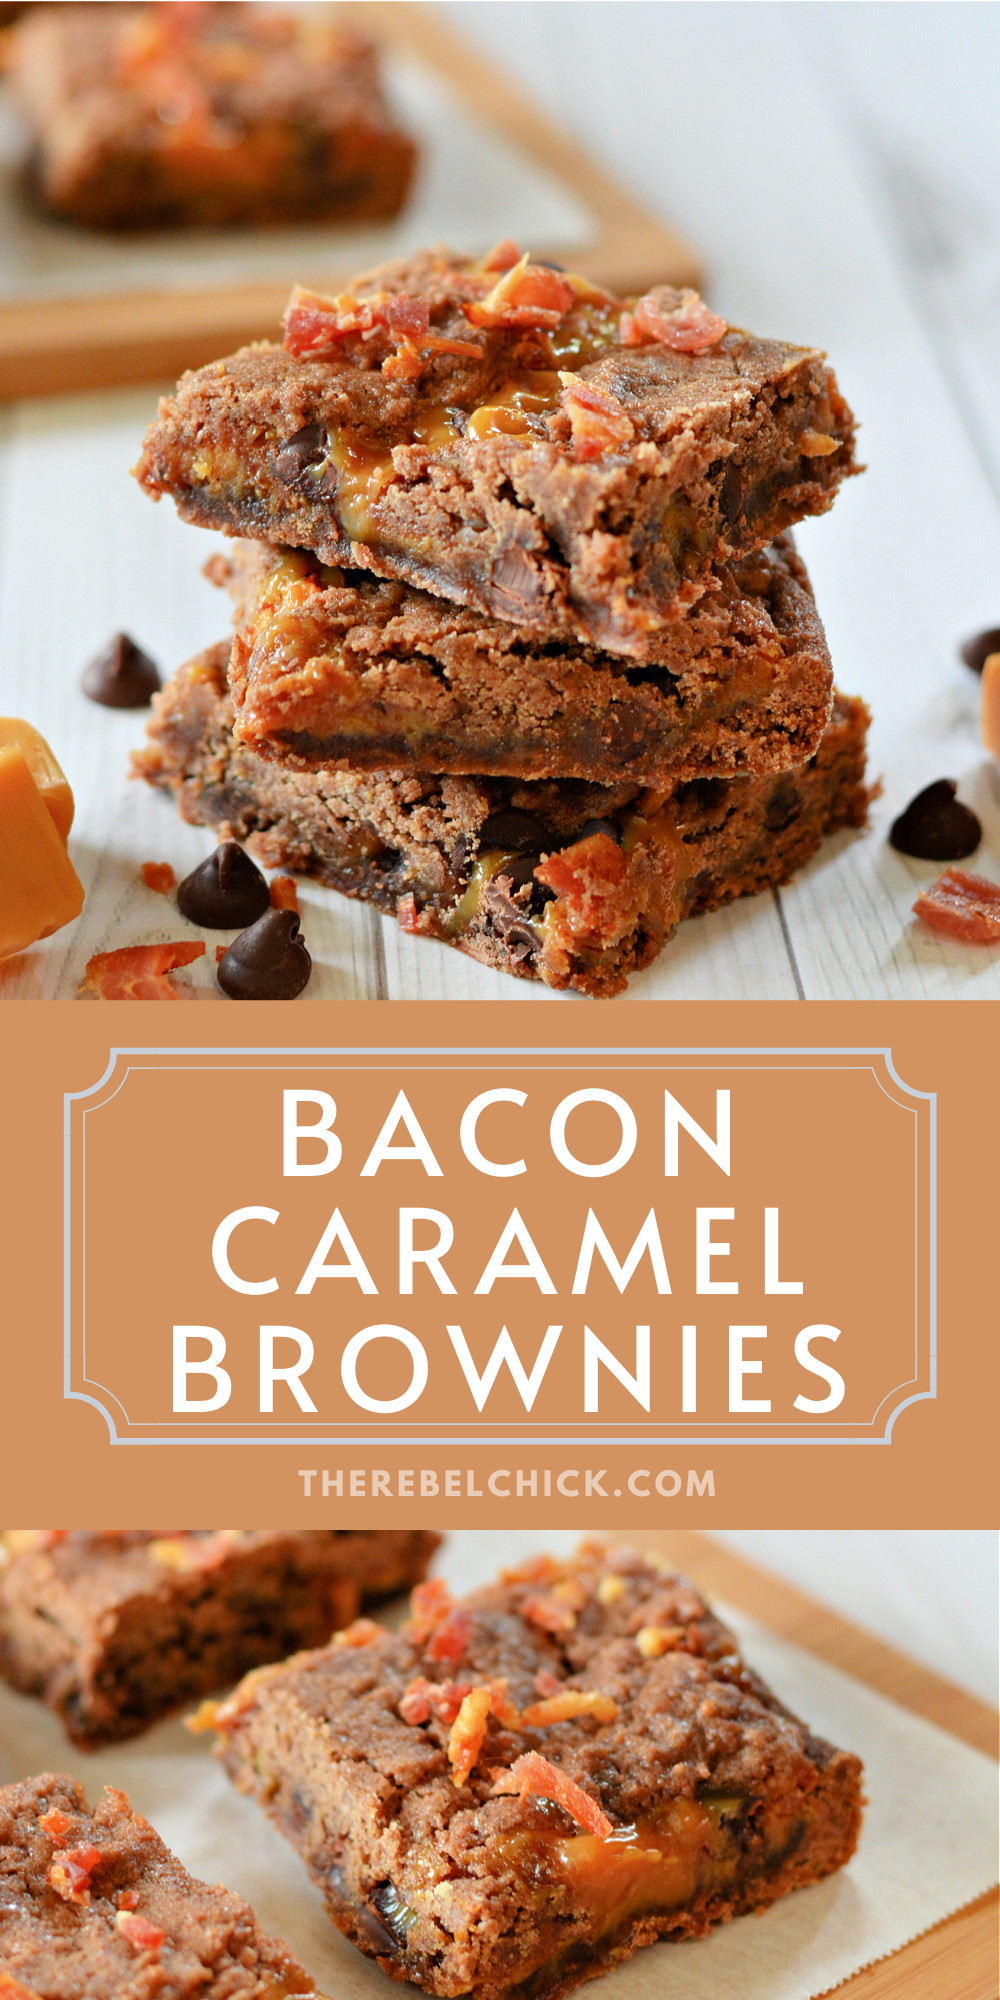 Brownies with Caramel and Bacon Recipe